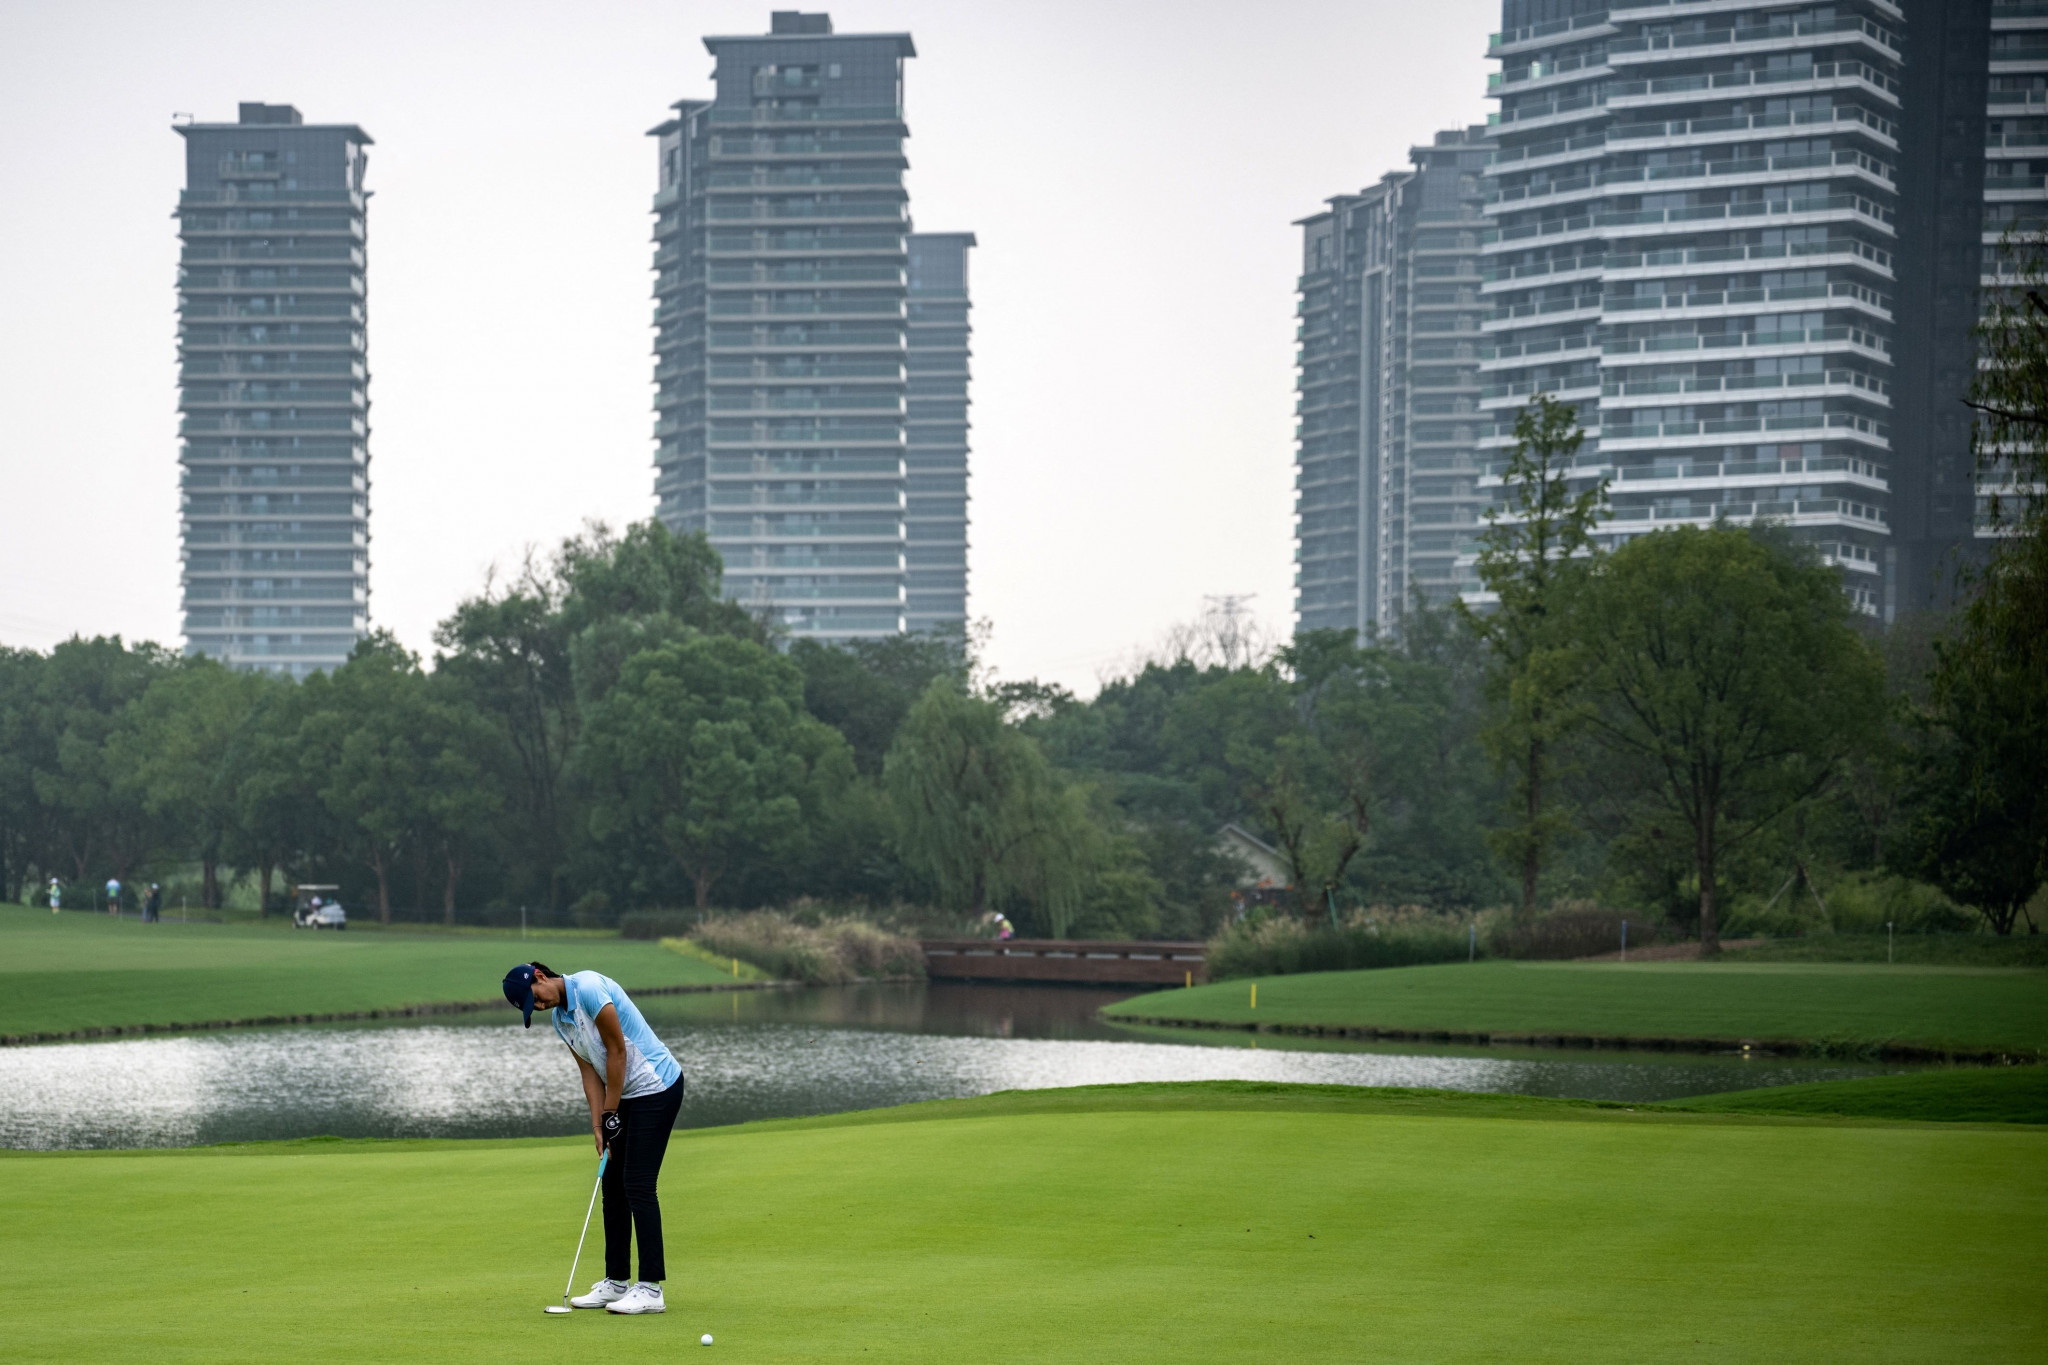 Aditi Ashok of India rolls the ball into the hole on her way to the women's golf crown in Hangzhou ©Getty Images